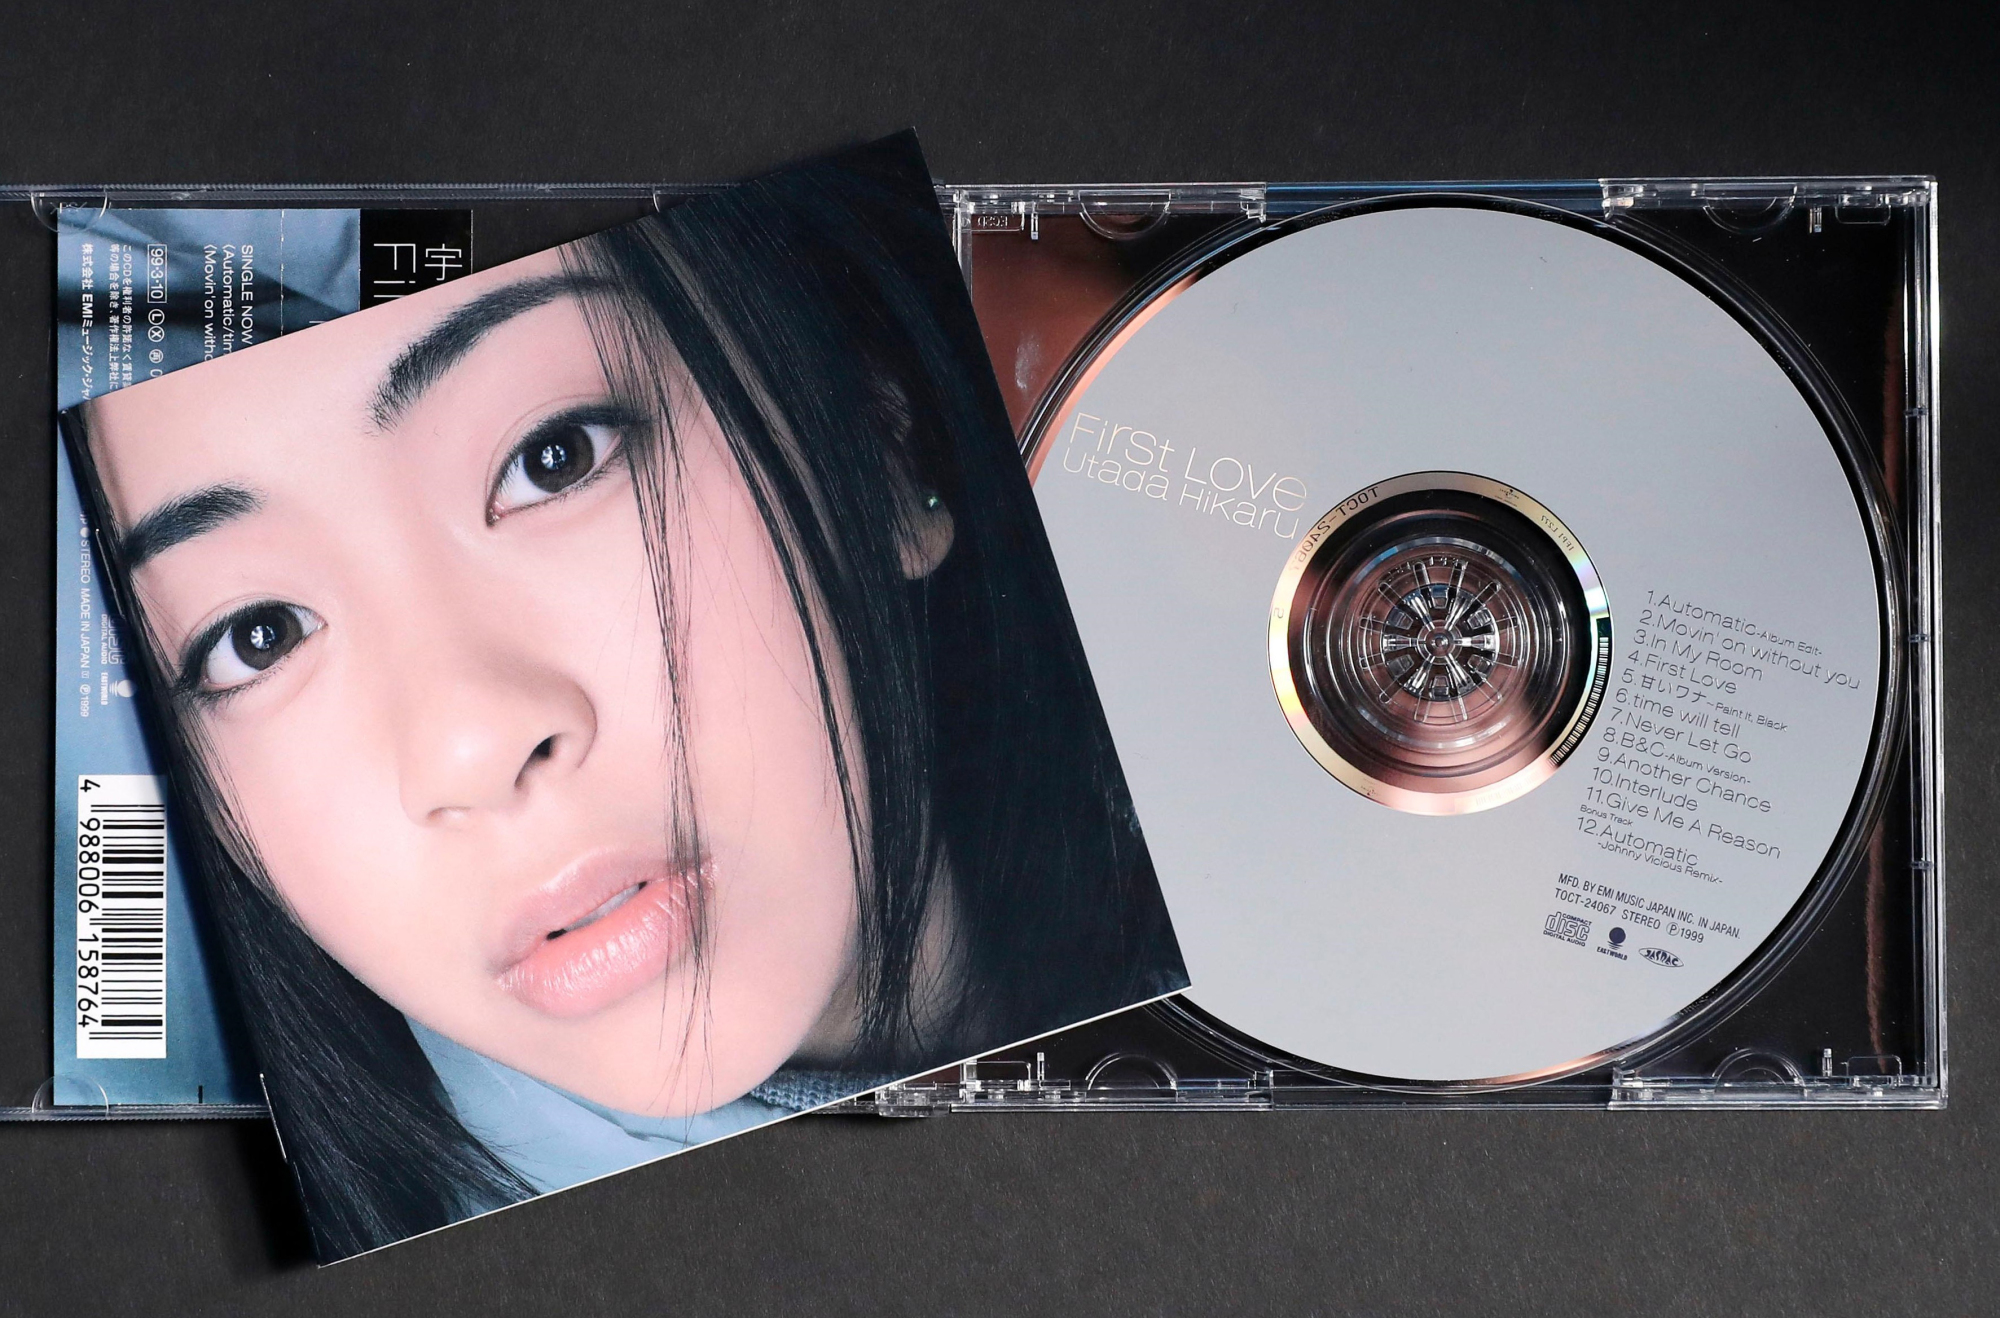 Japan's CD album output fell below 100 million for first time in